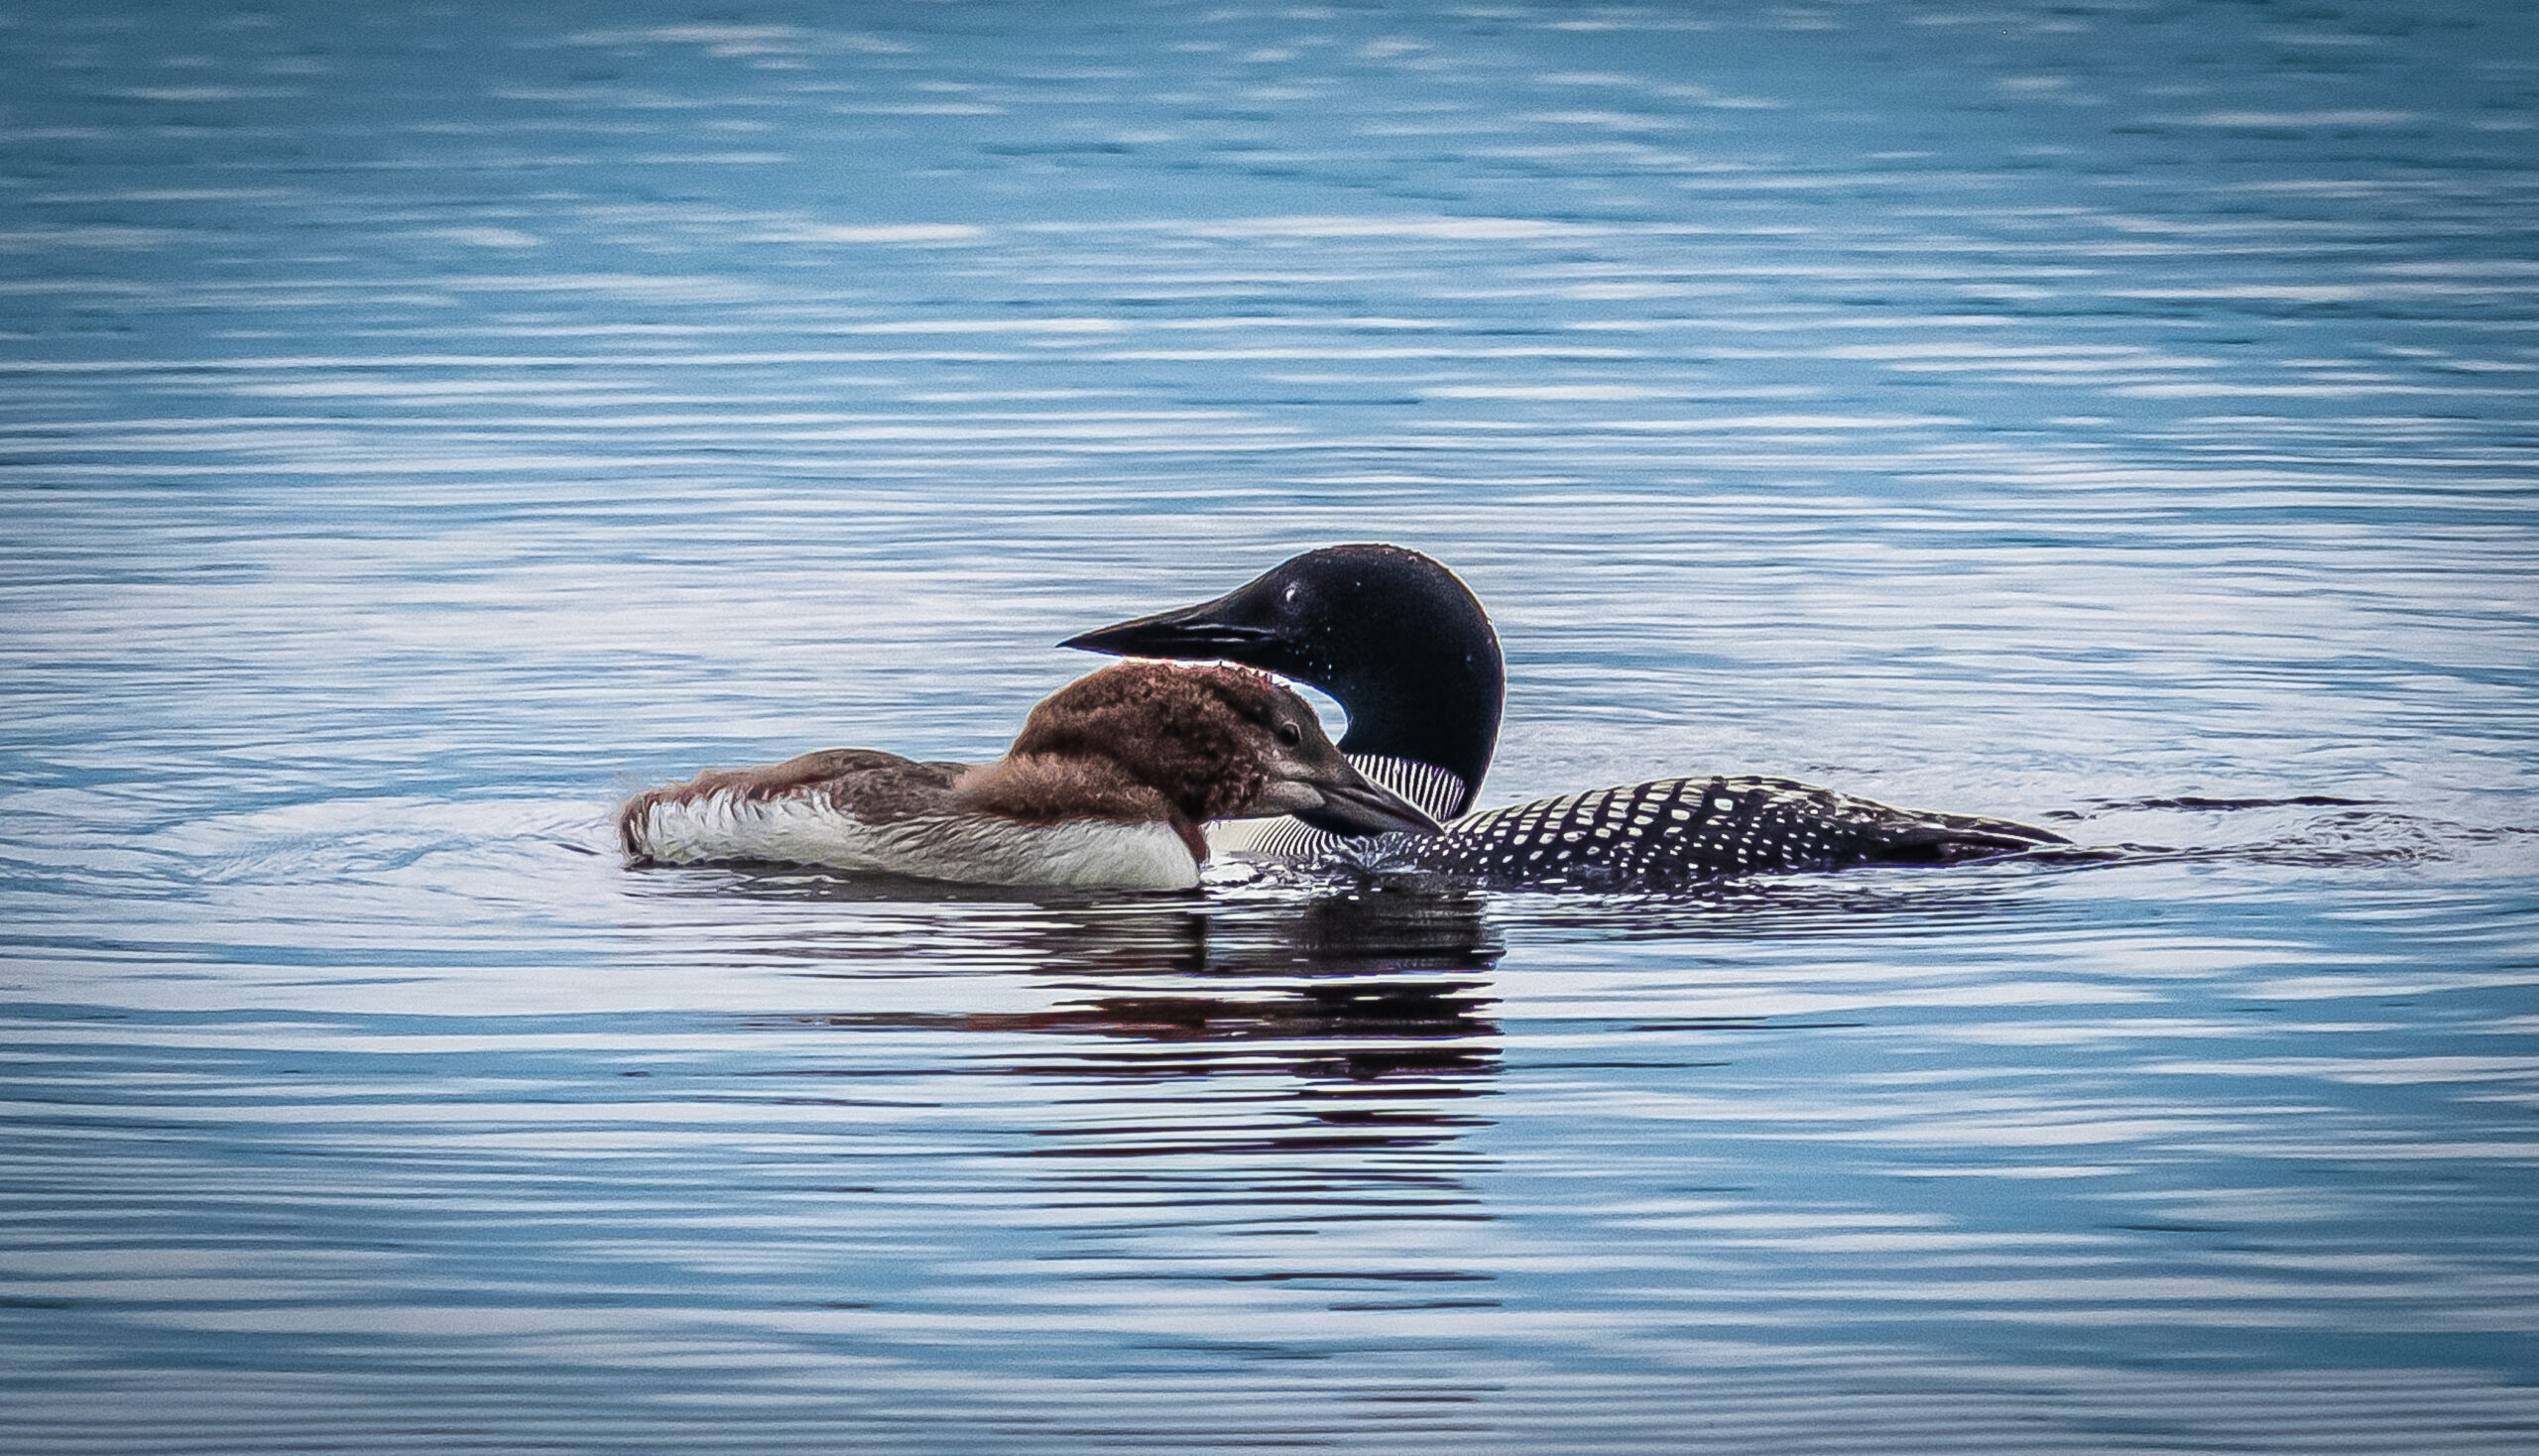 Loon photo by Elizabeth Payne Loon Counter